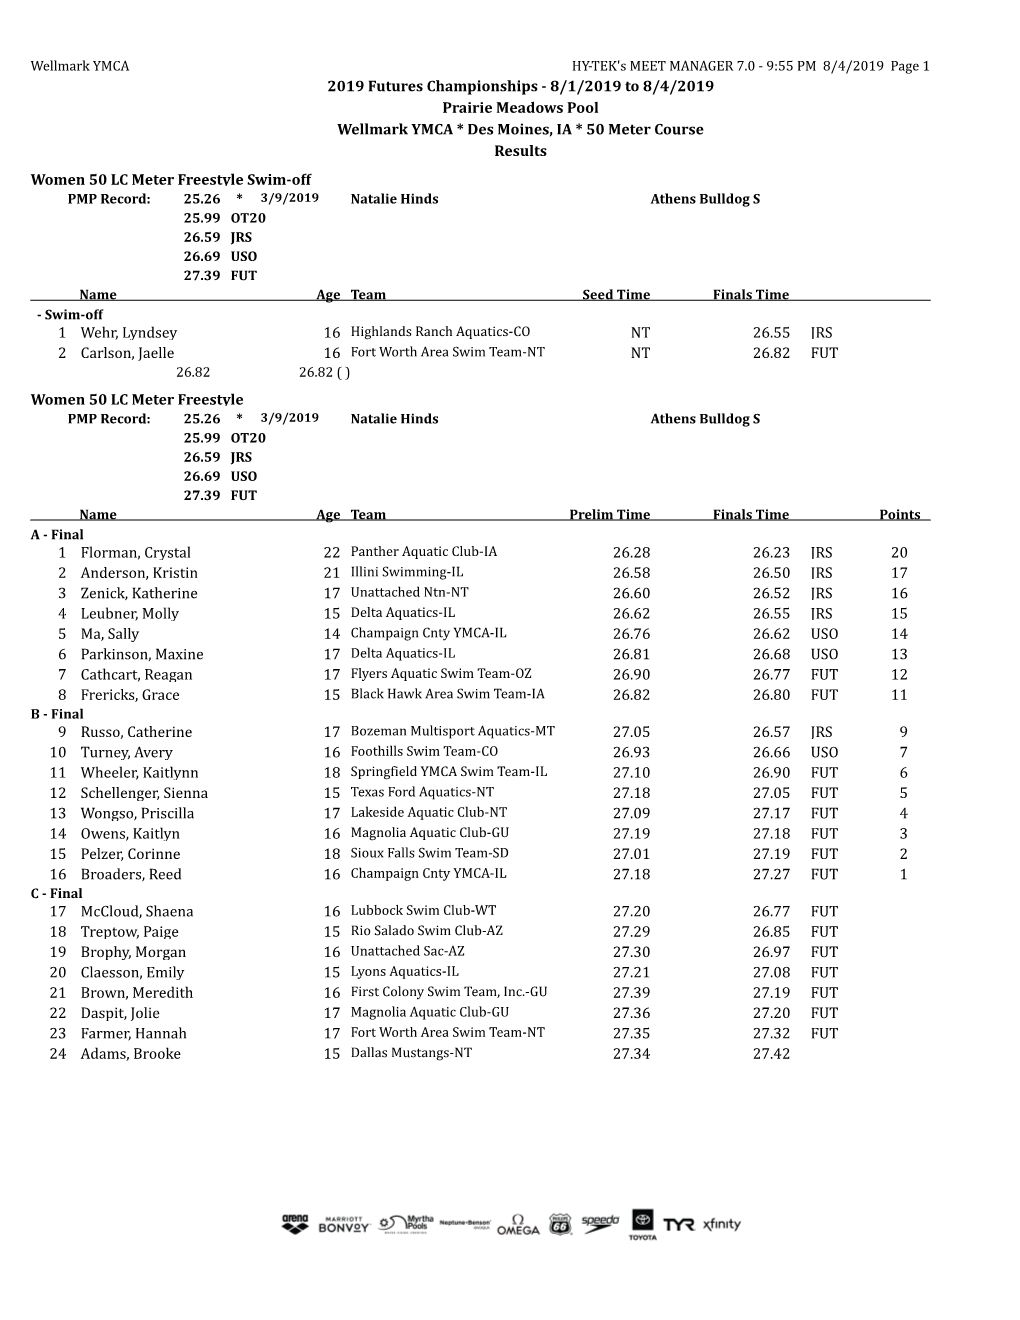 2019 Futures Championships - 8/1/2019 to 8/4/2019 Prairie Meadows Pool Wellmark YMCA * Des Moines, IA * 50 Meter Course Results